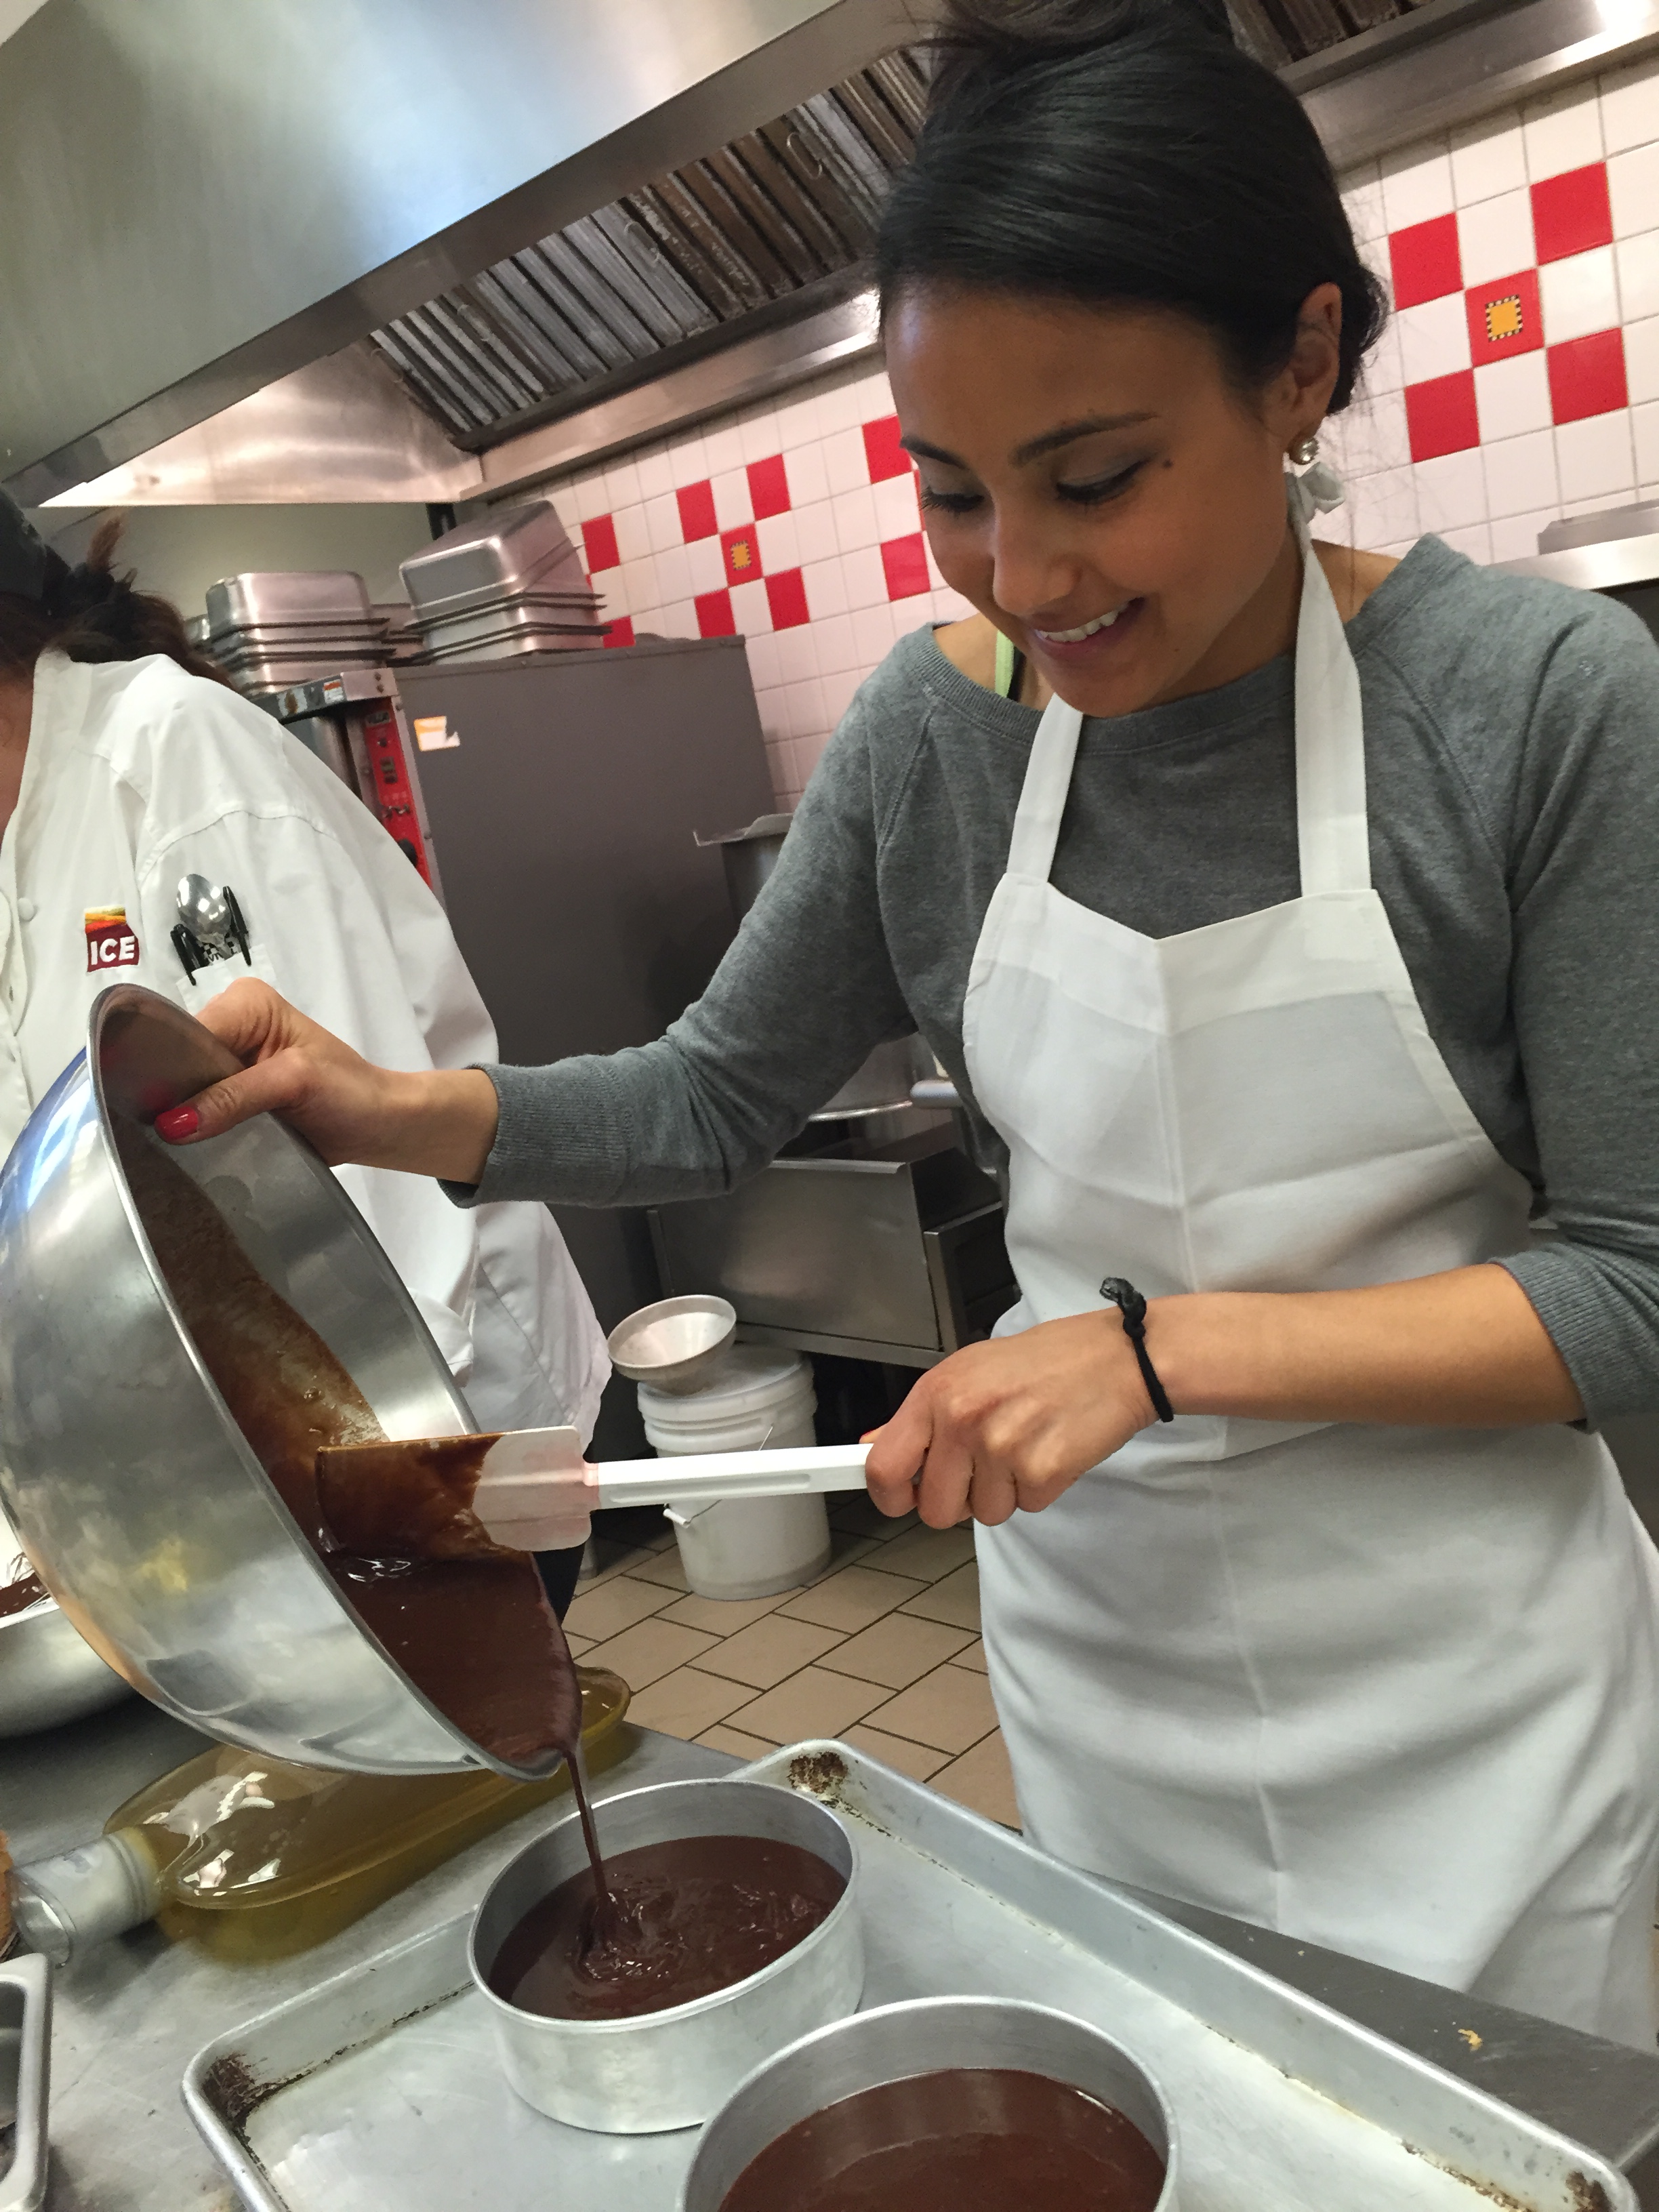 Yasmin trying a new recipe during her Baking & Pastry course at the Institute of Culinary Education